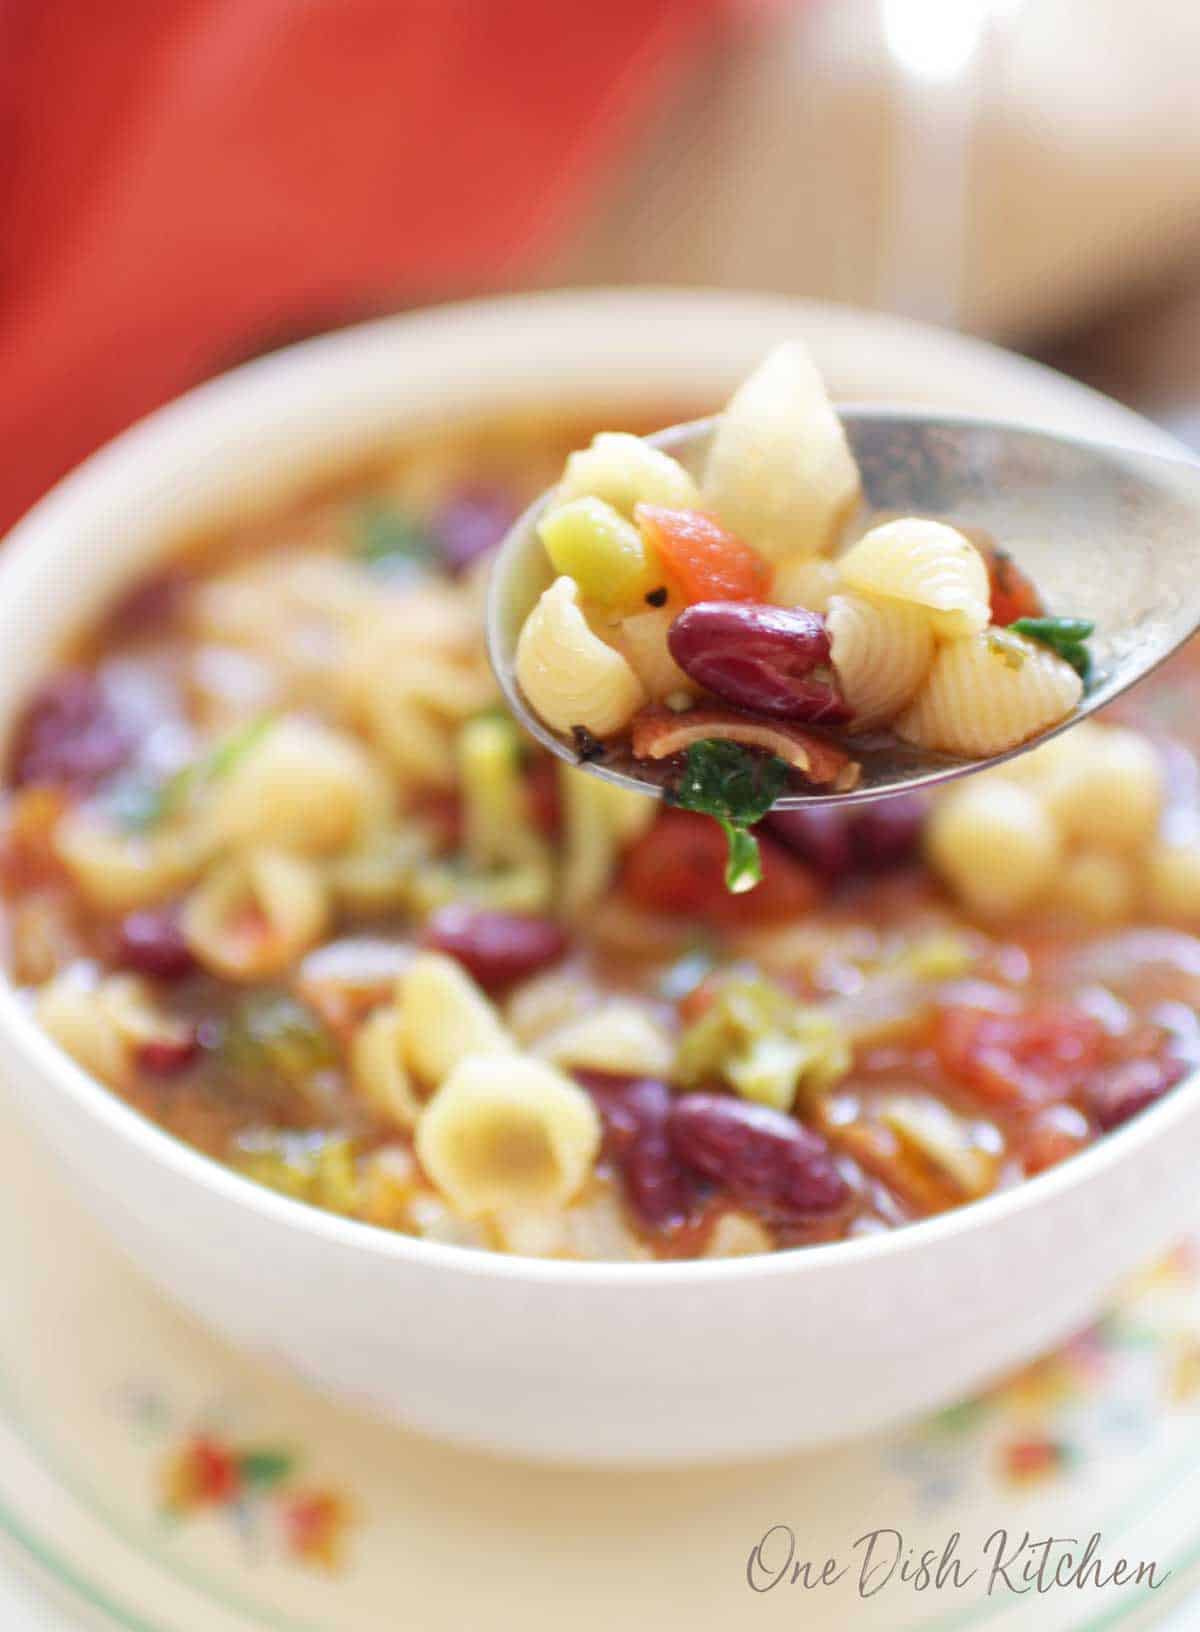 A closeup of a spoonful of minestrone soup filled with beans and pasta noodles.